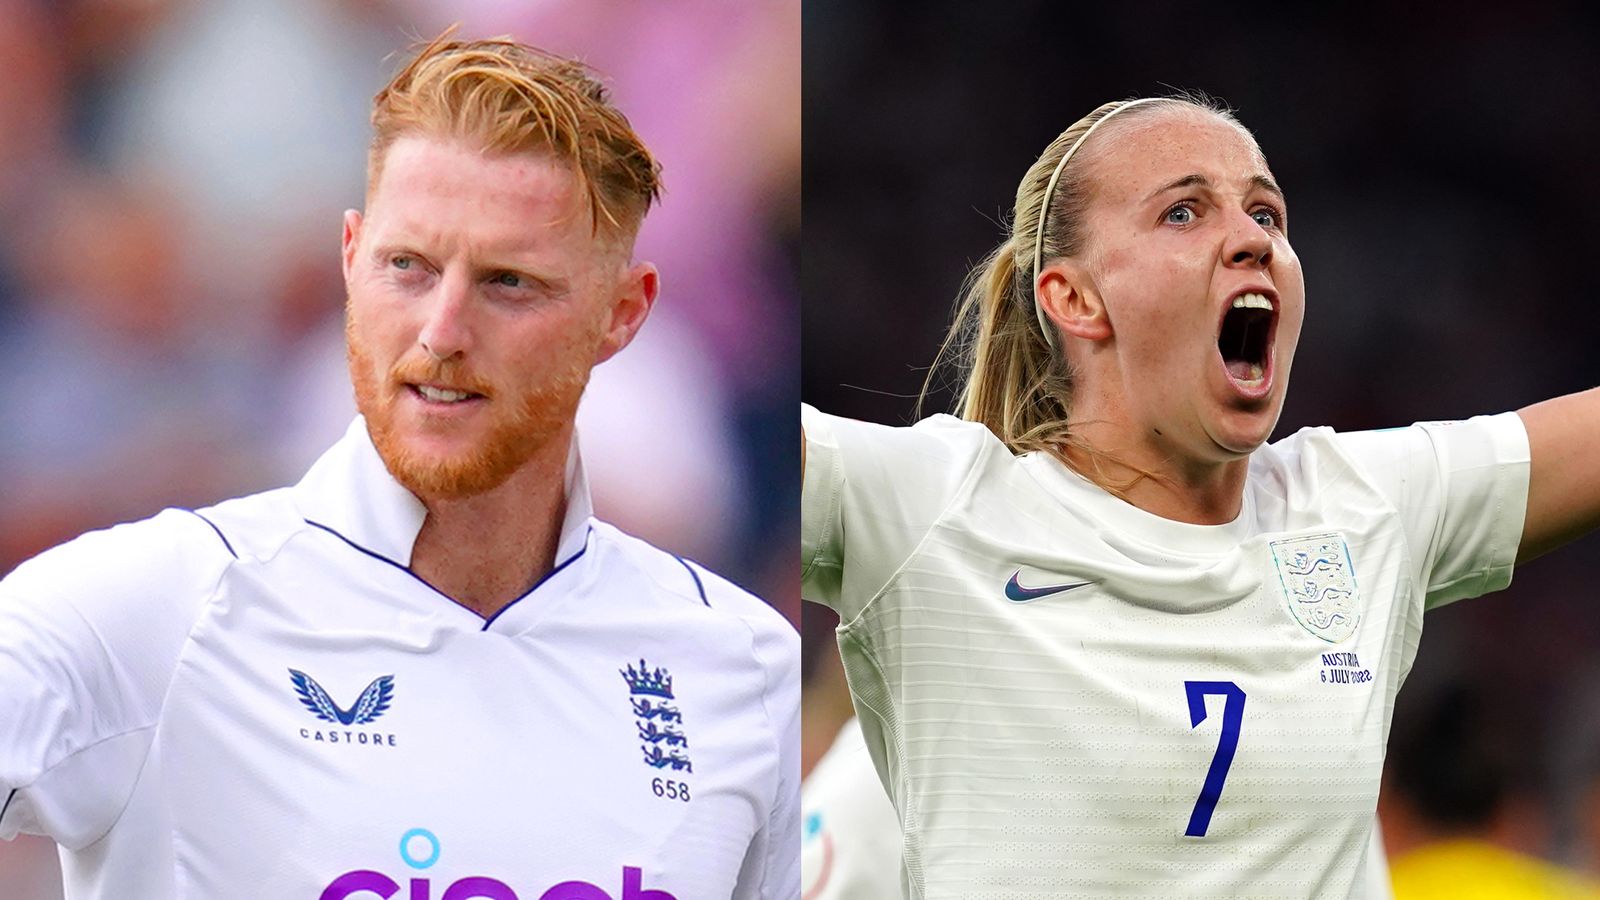 Ben Stokes and Beth Mead nominated for BBC Sports Personality of the Year Award